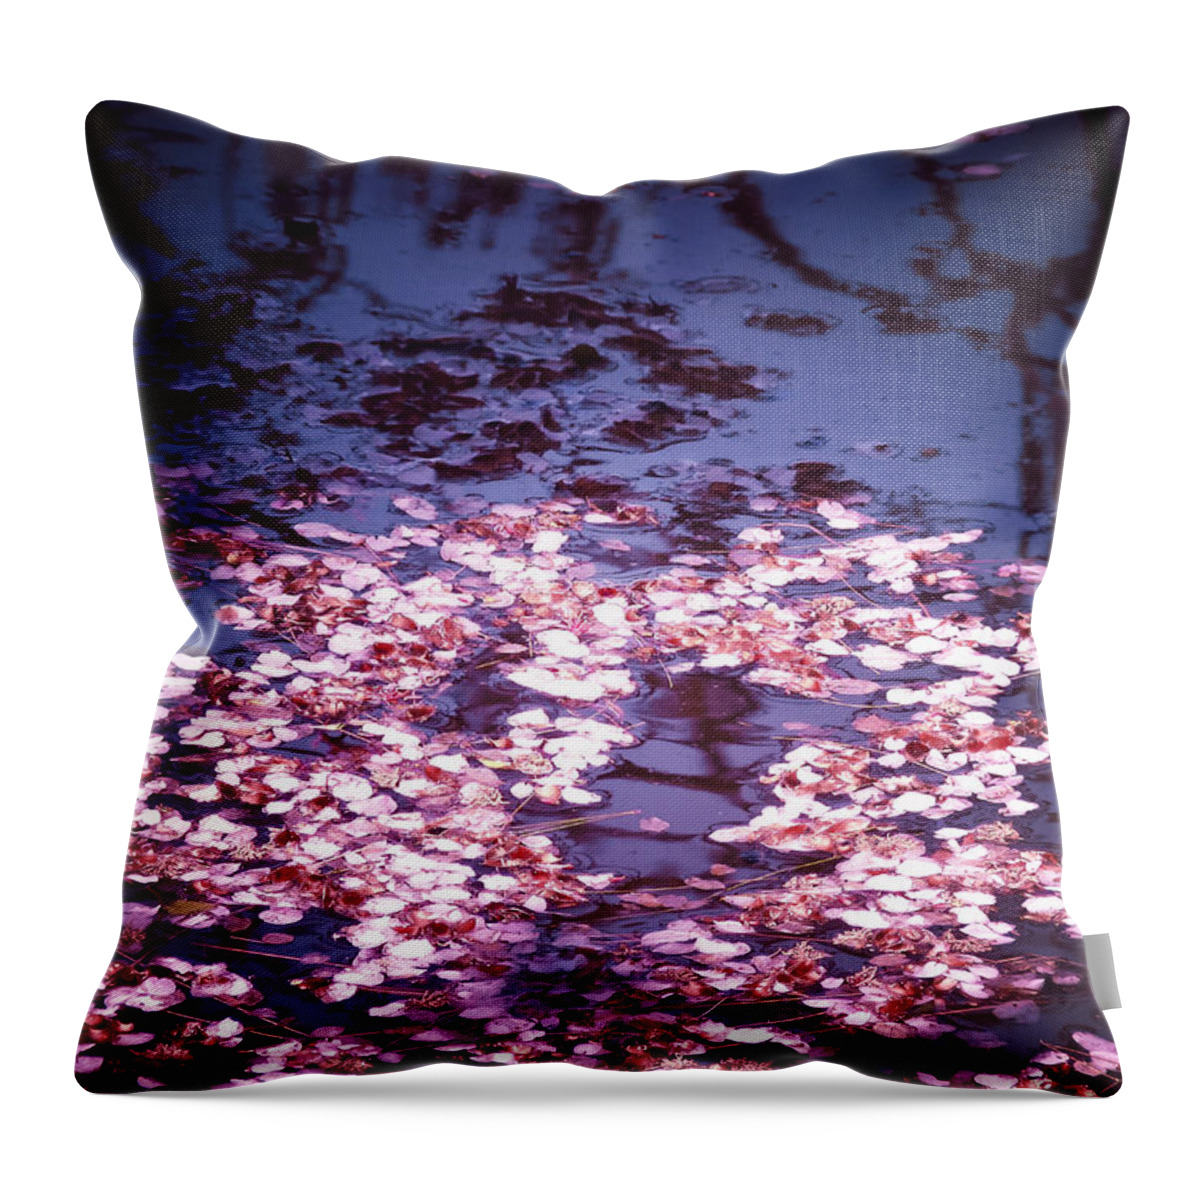 Cherry Blossom Throw Pillow featuring the photograph Spring's Embers - Cherry Blossom Petals on the Surface of a Pond by Vivienne Gucwa